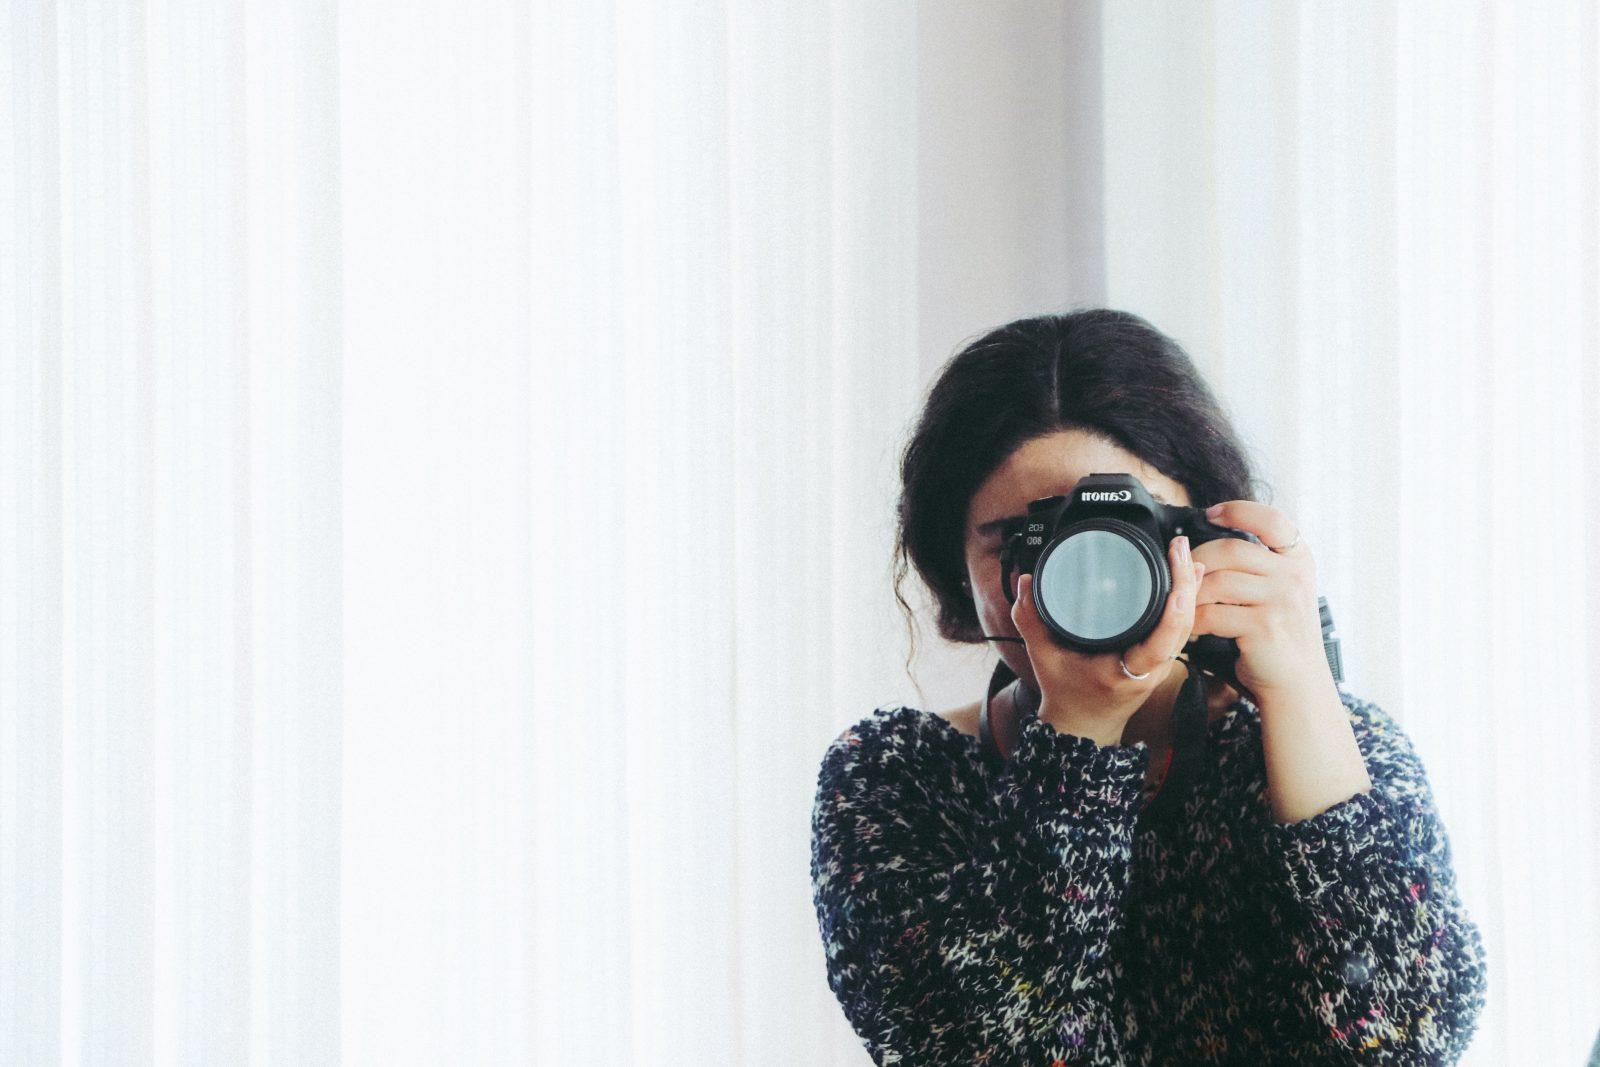 What qualifications do you need to be a professional photographer?